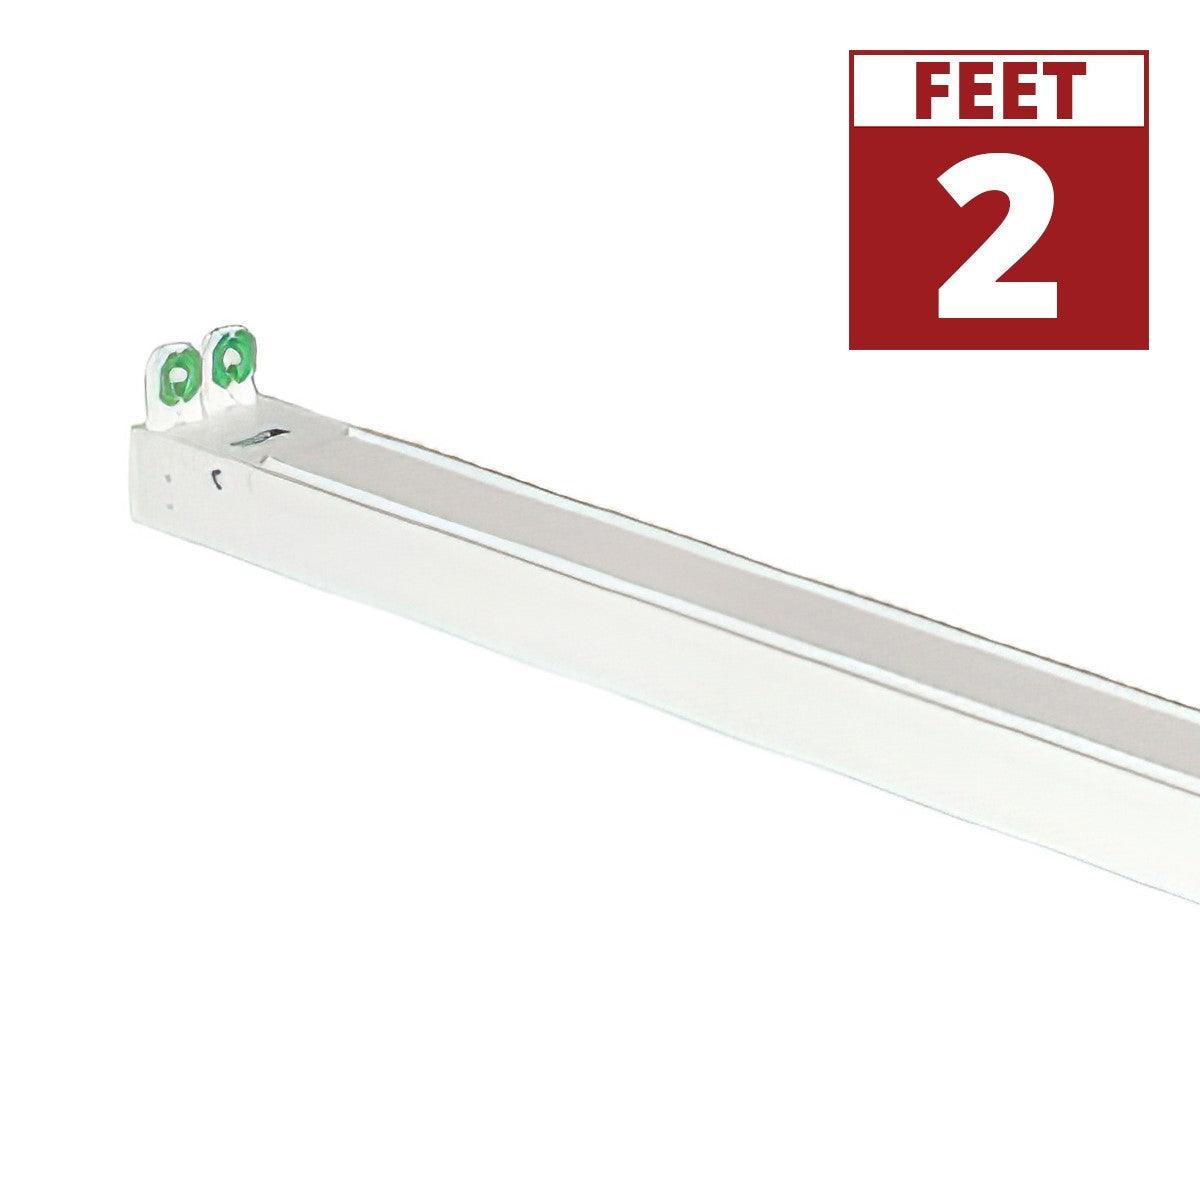 2ft LED Ready Strip Light 2-lamp Double End Wiring LED T8 Bulbs Not Included - Bees Lighting